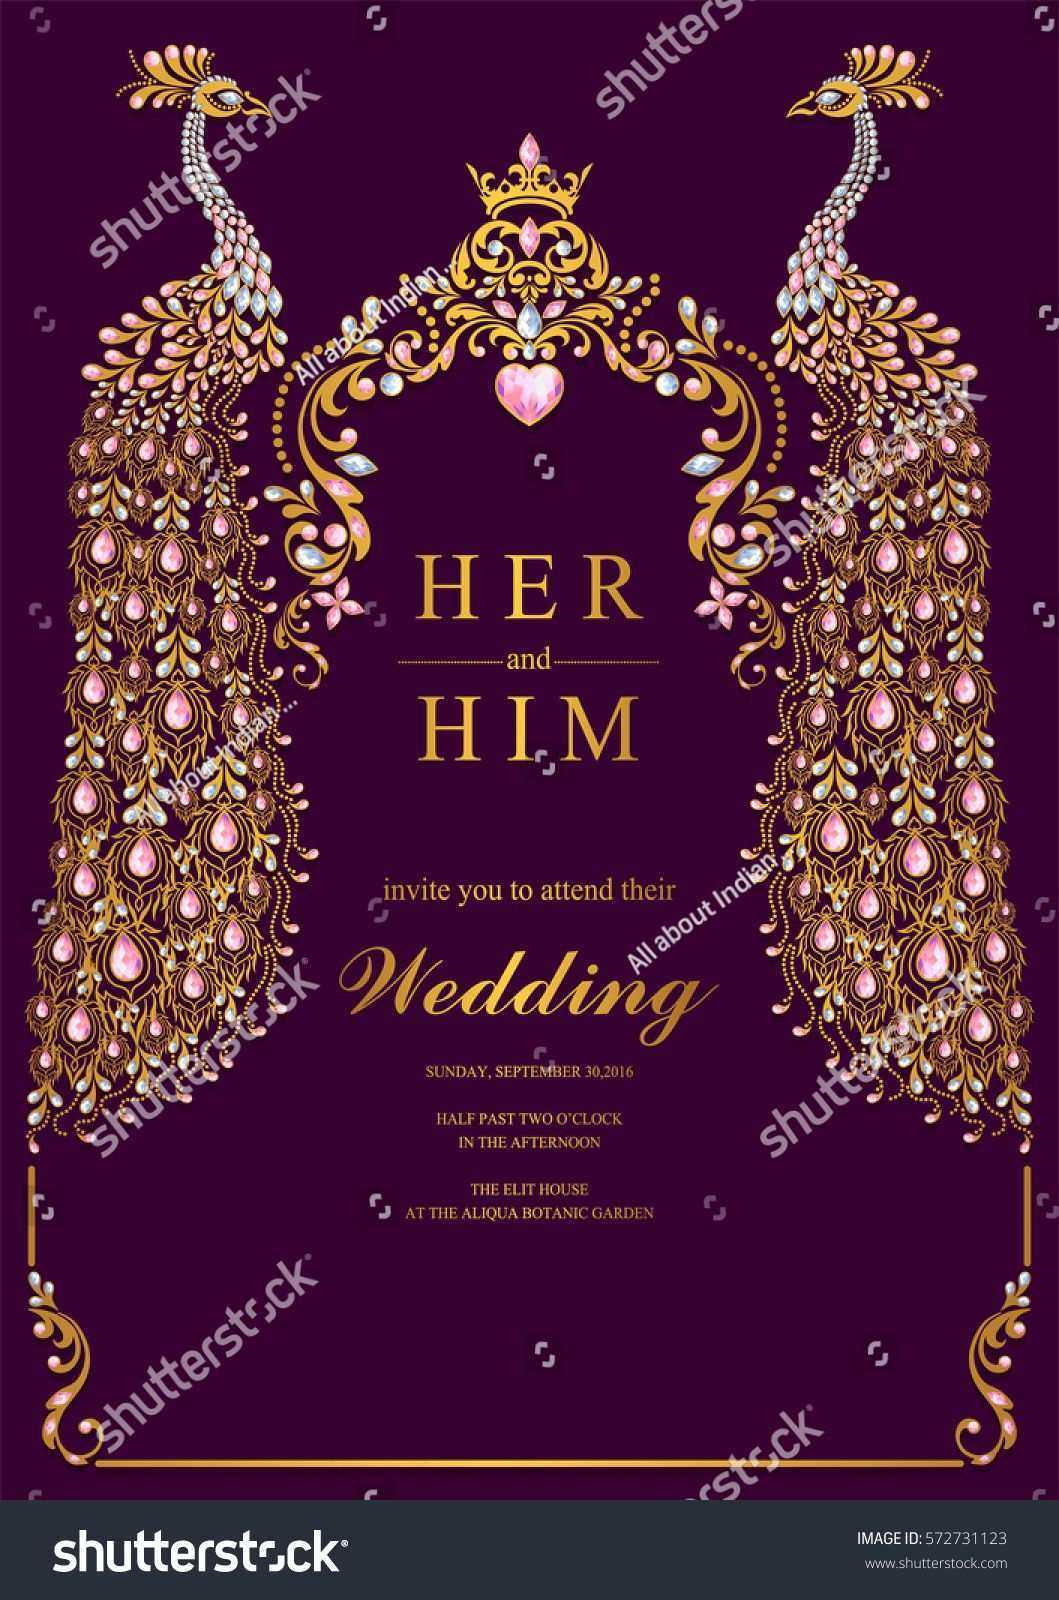 42 Online Indian Wedding Invitation Template In Word With For Indian Wedding Cards Design Templates